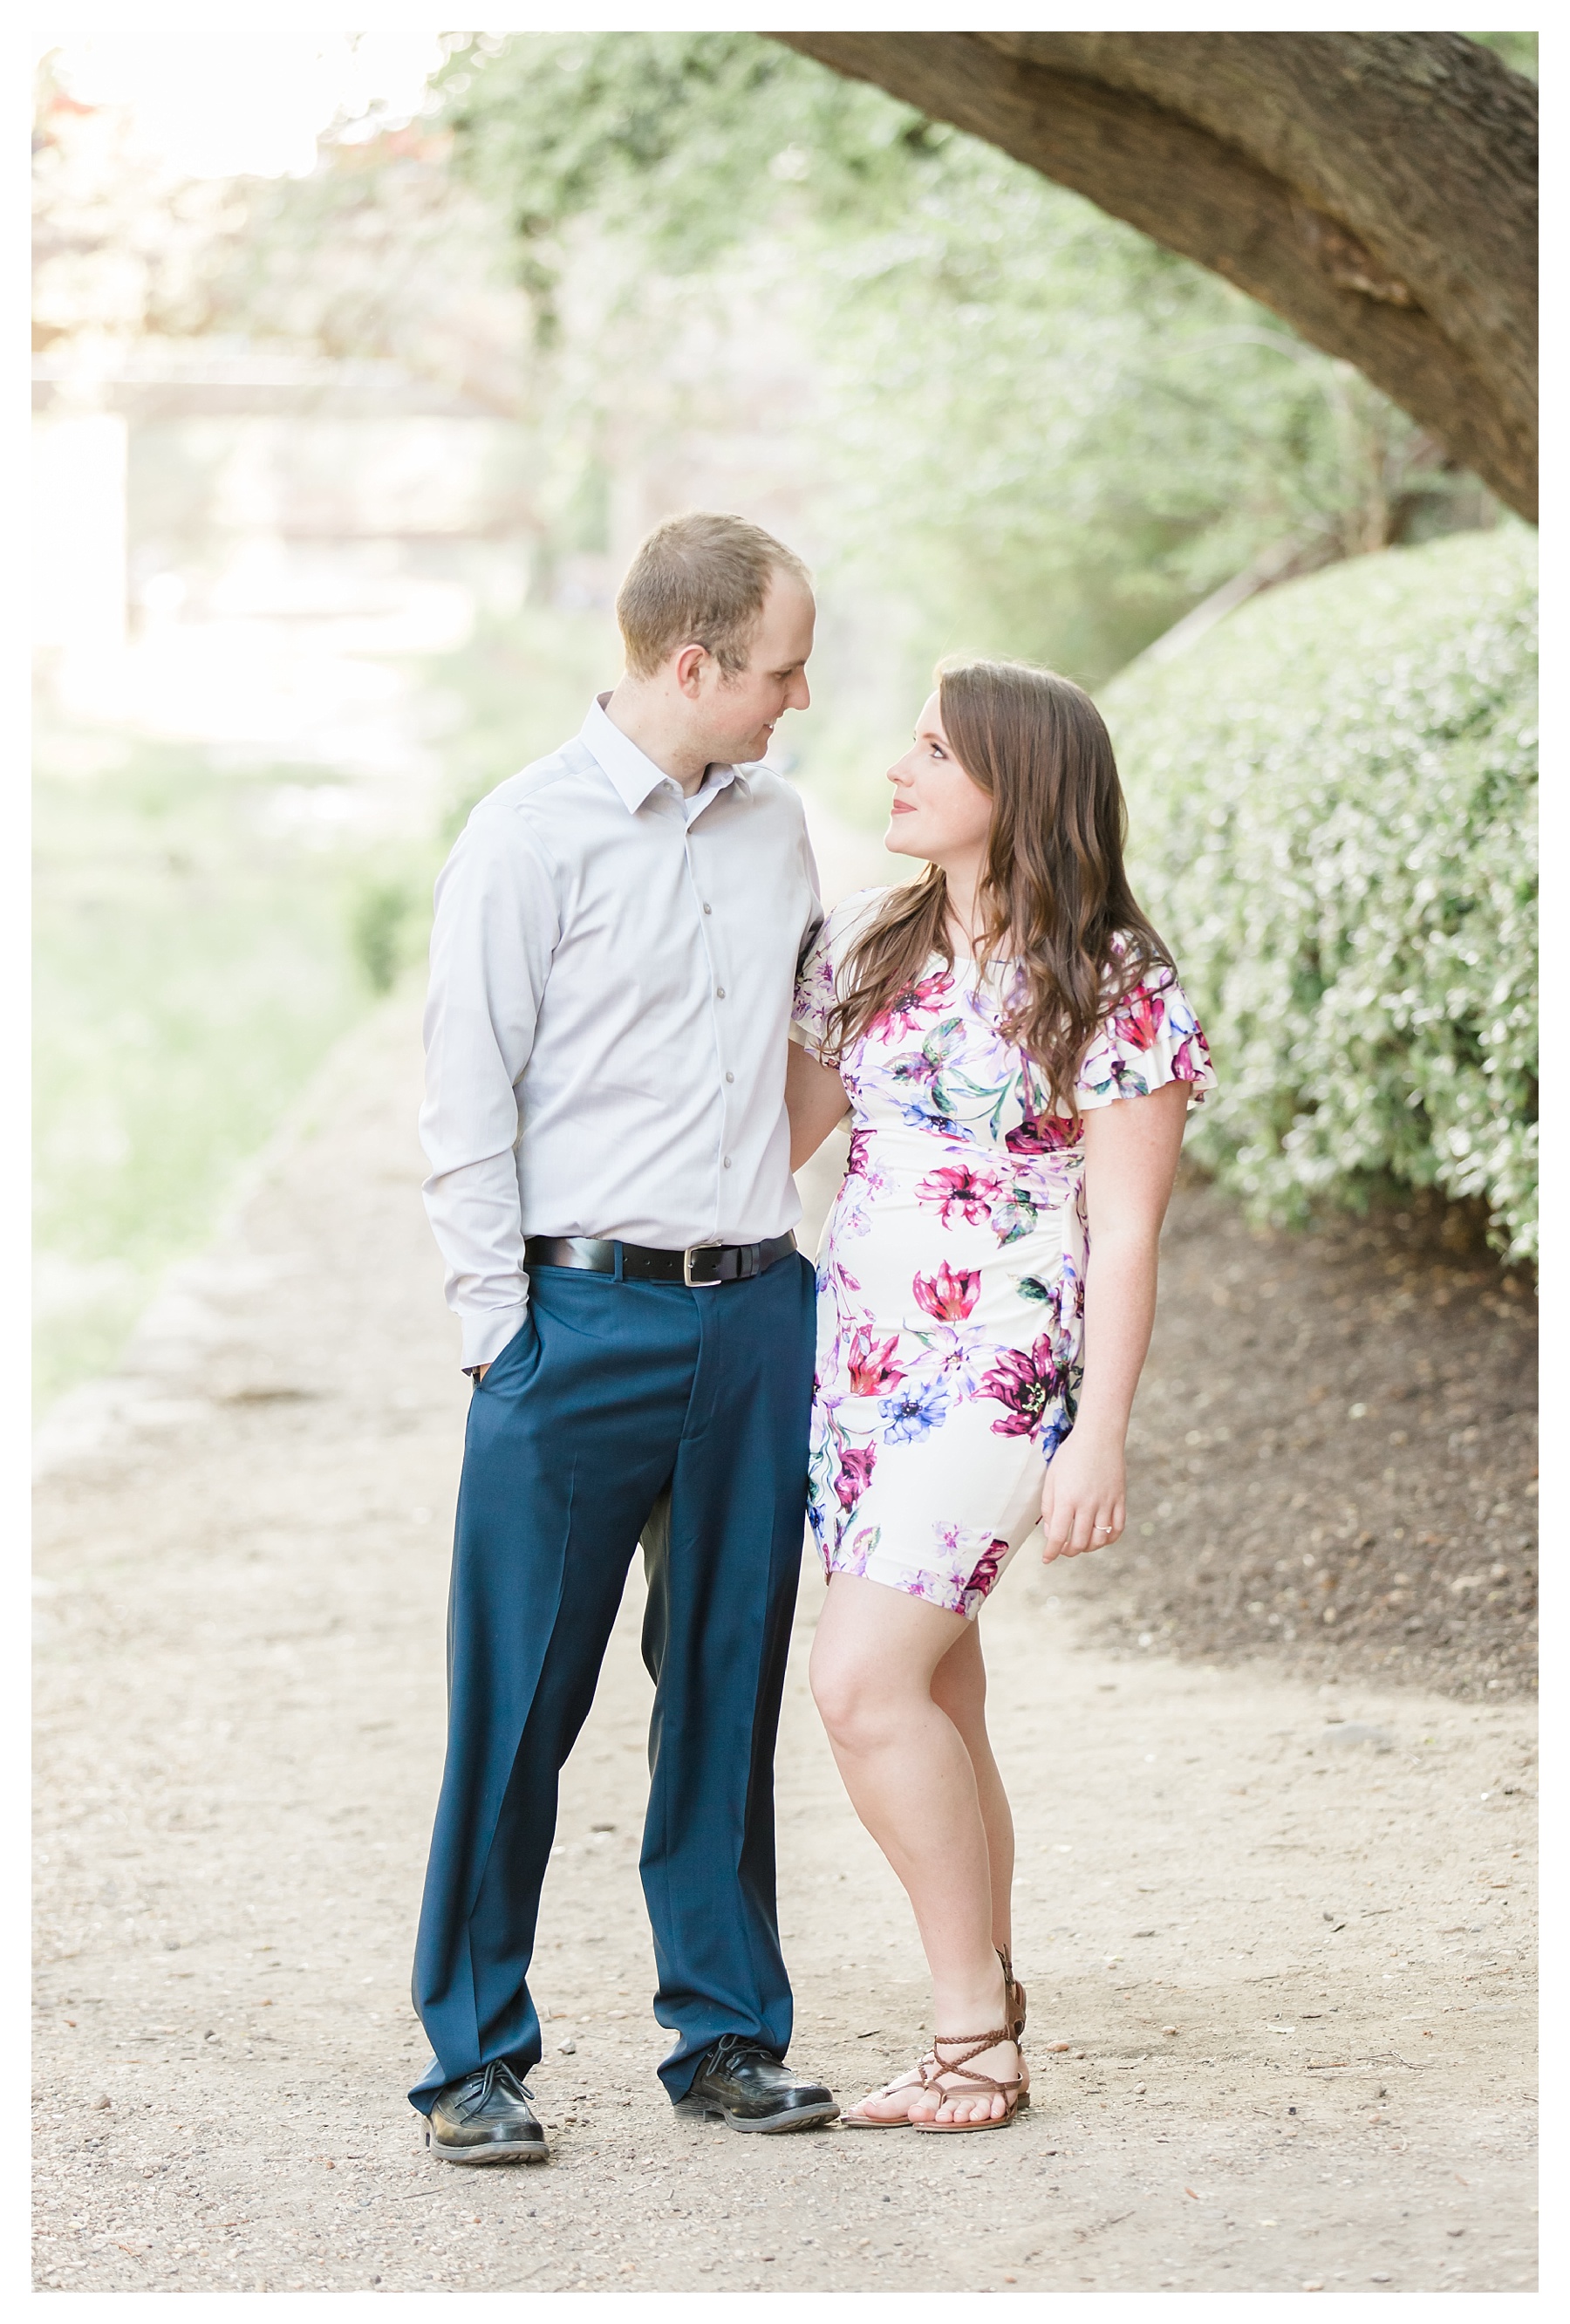 Candice Adelle Photography DC Wedding Photographer DC Georgetown Engagement_1552.jpg